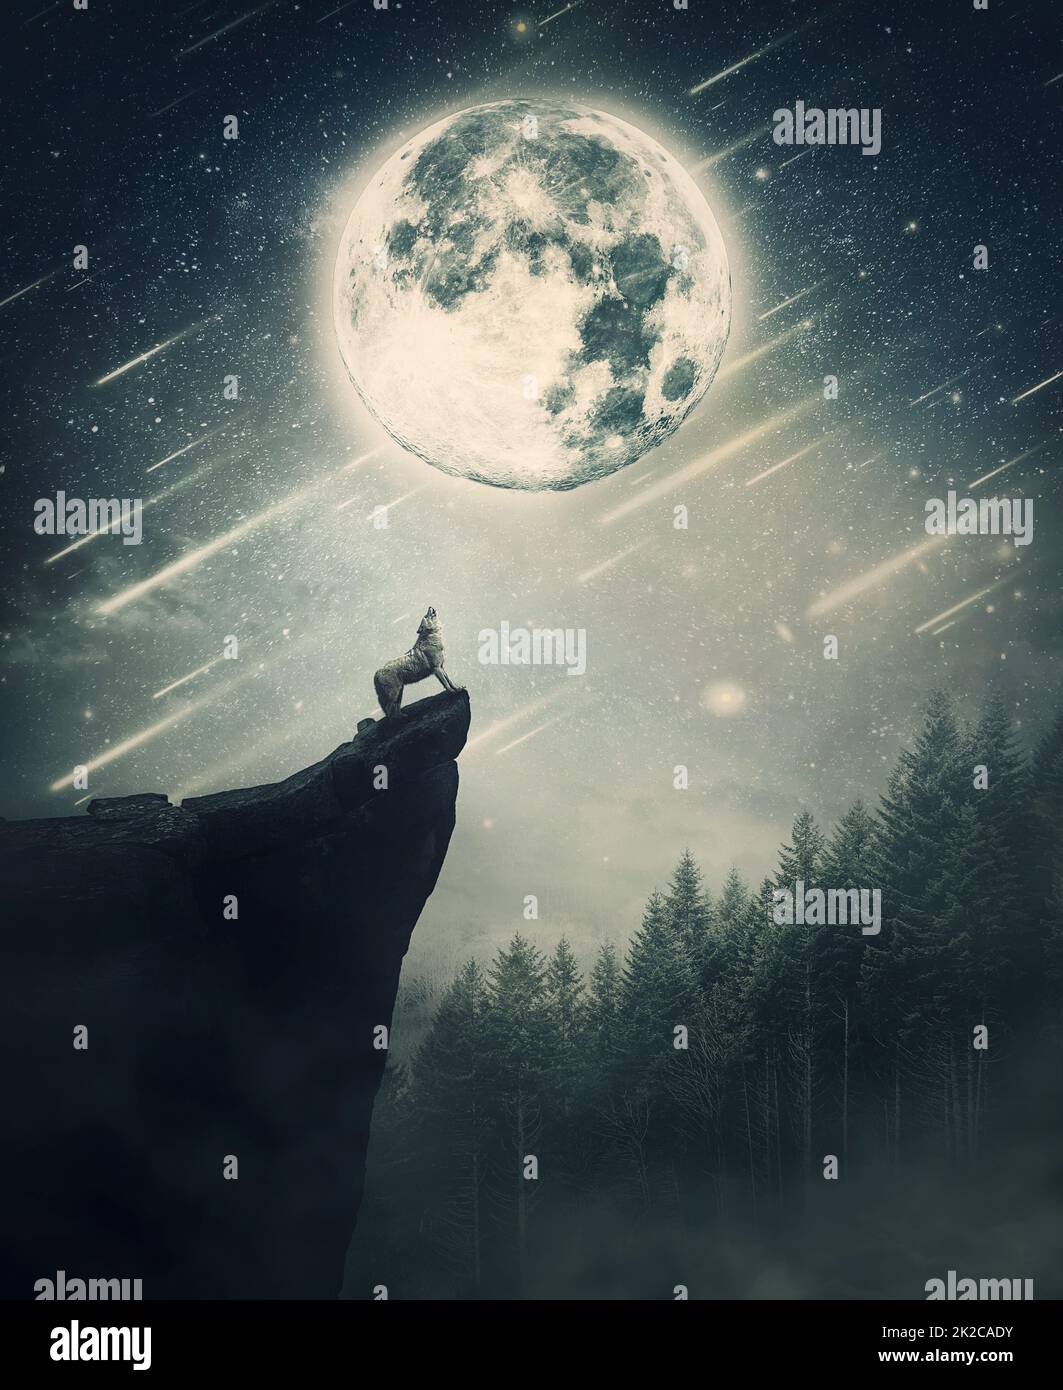 Howling wolf on the top of a cliff over night sky background with shining full moon. Wildlife scene with falling stars over the coniferous forest. Stock Photo